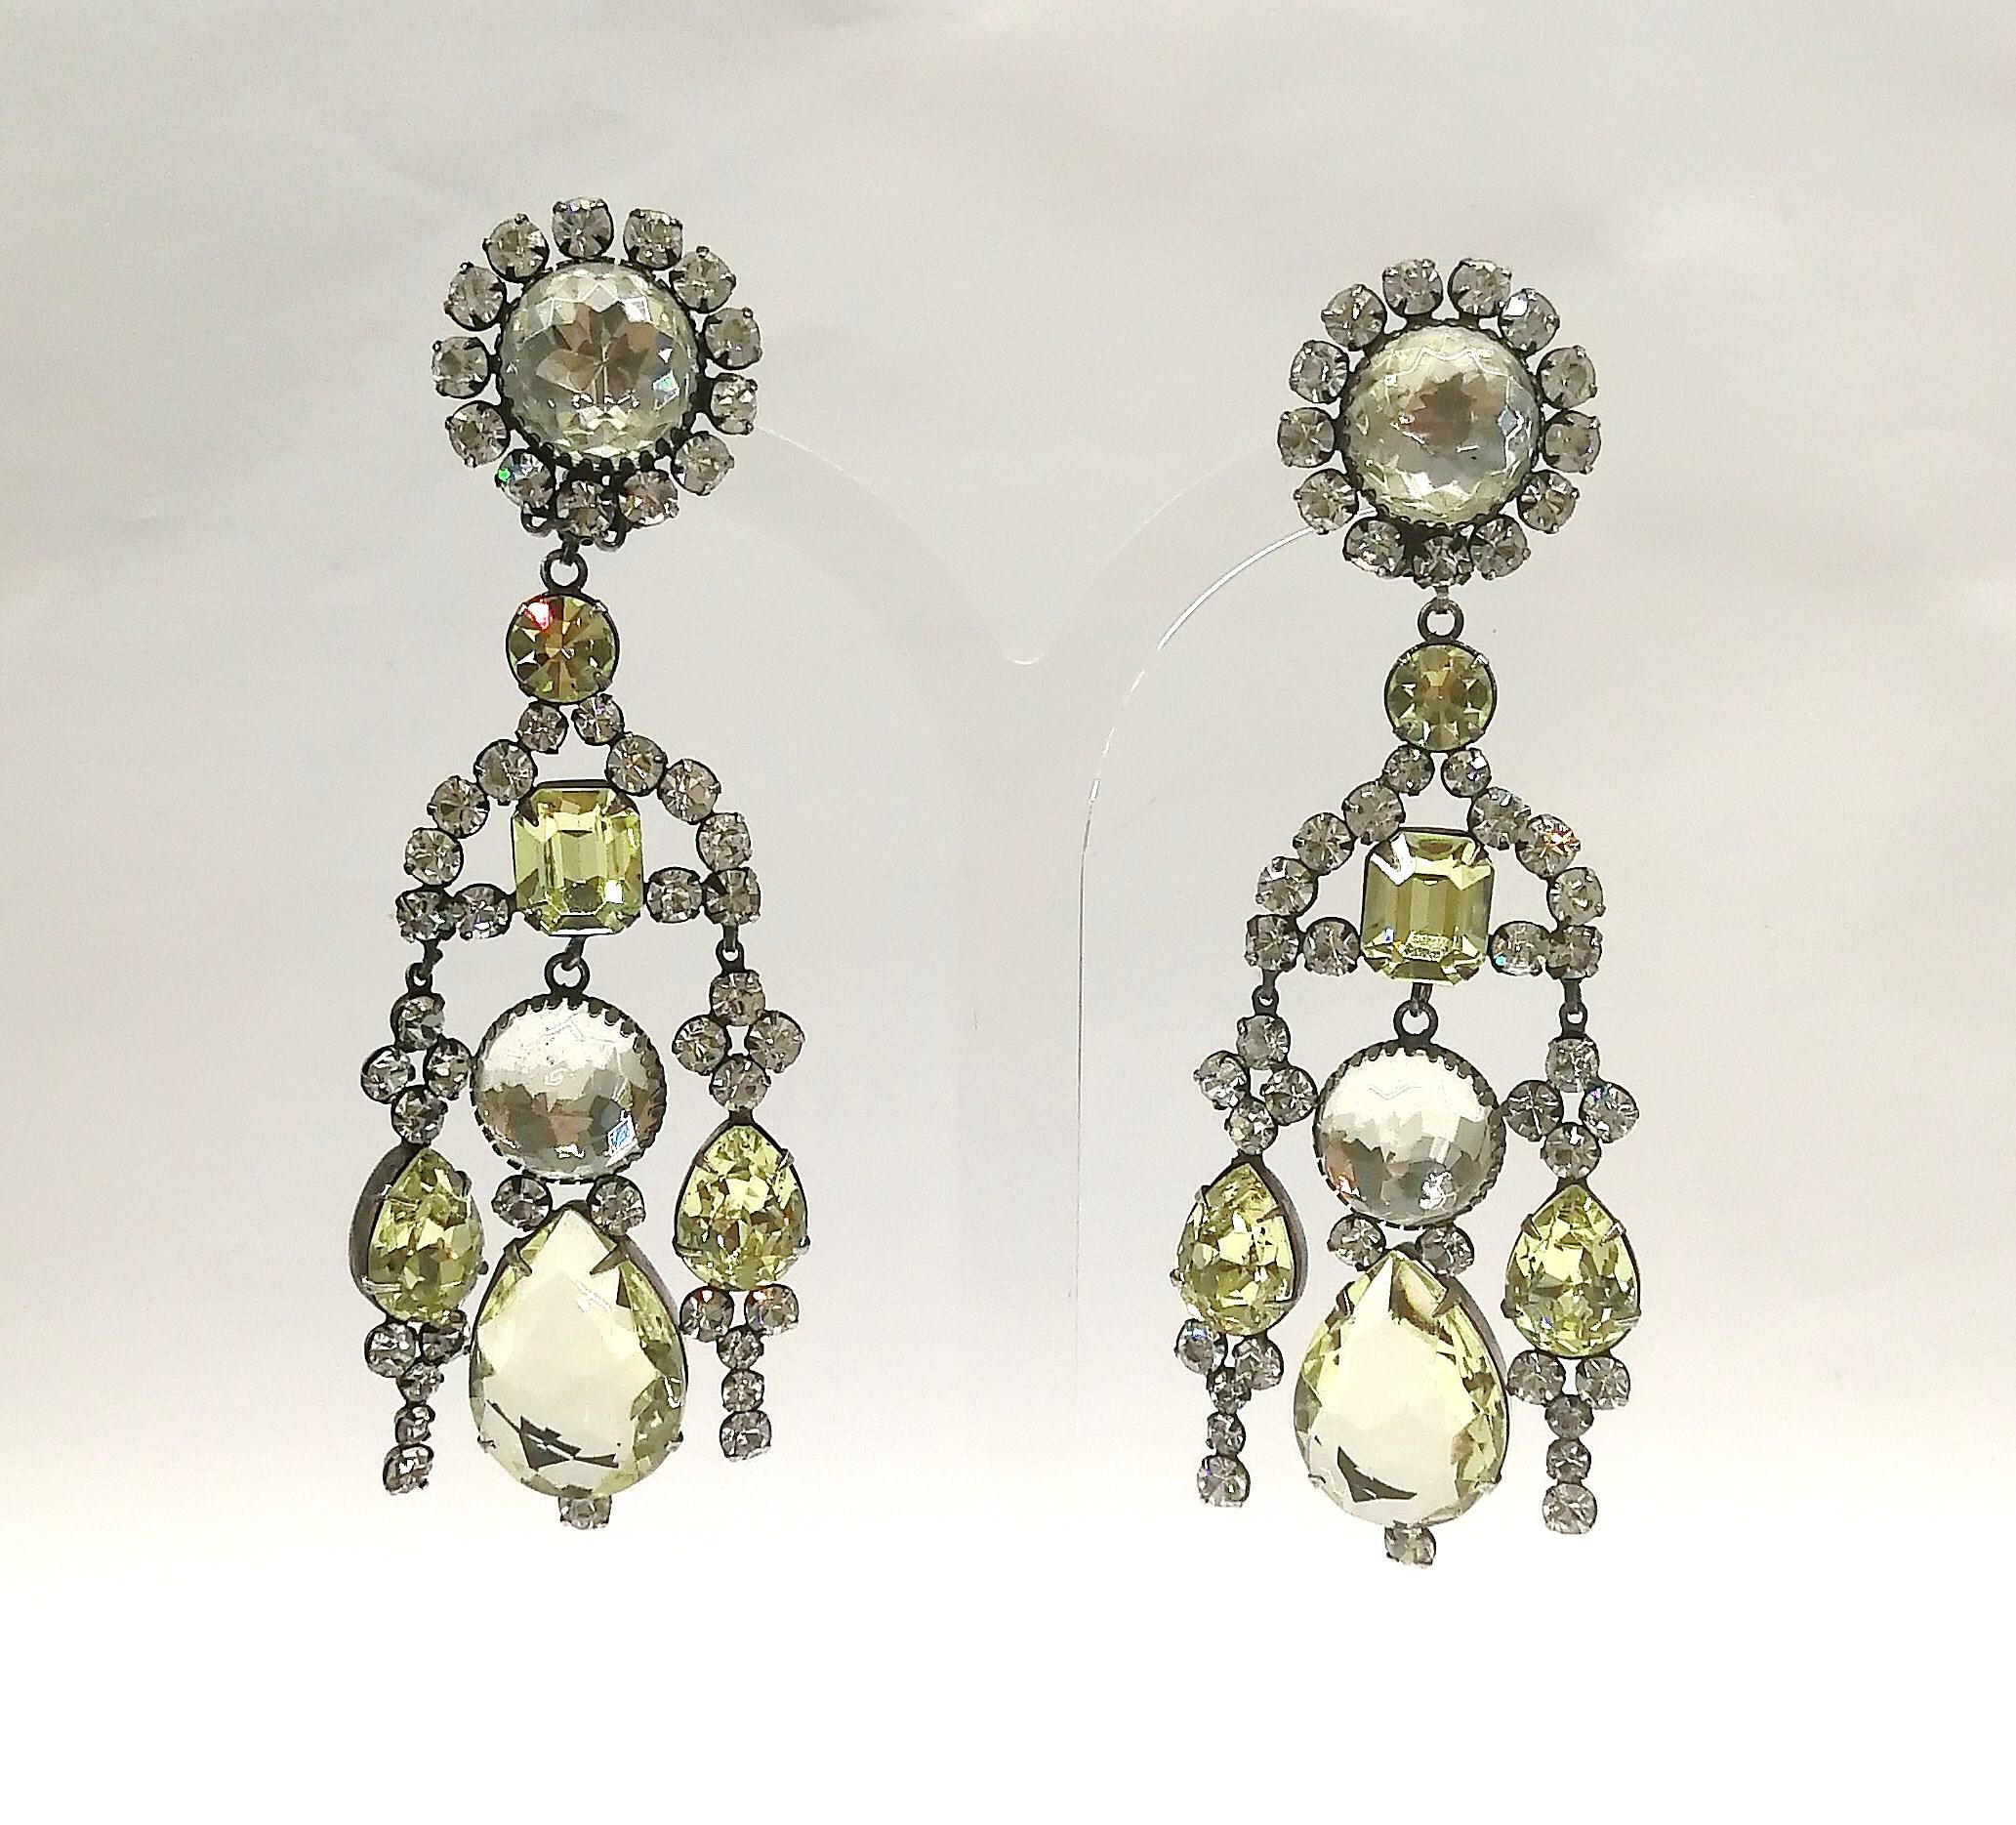 These truly stunning earrings from the early creations of Kenneth Jay Lane in the 1960s, detail an unusual and sophisticated colour combination of clear and pale citrine pastes of varying cuts and sizes, set in an antiqued silvered metal.